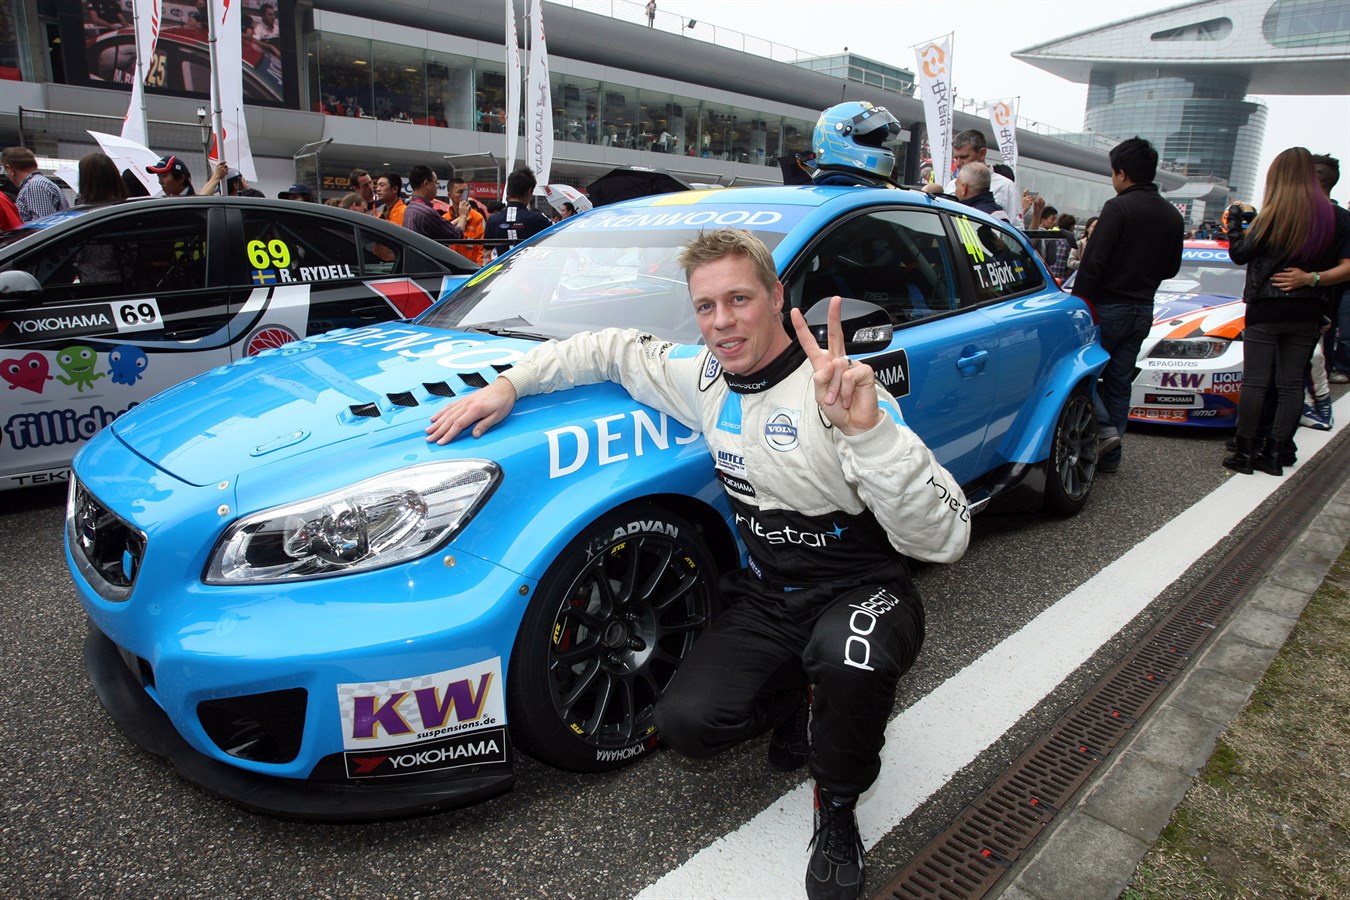 Tough but competitive WTCC weekend for Volvo Polestar Racing in China